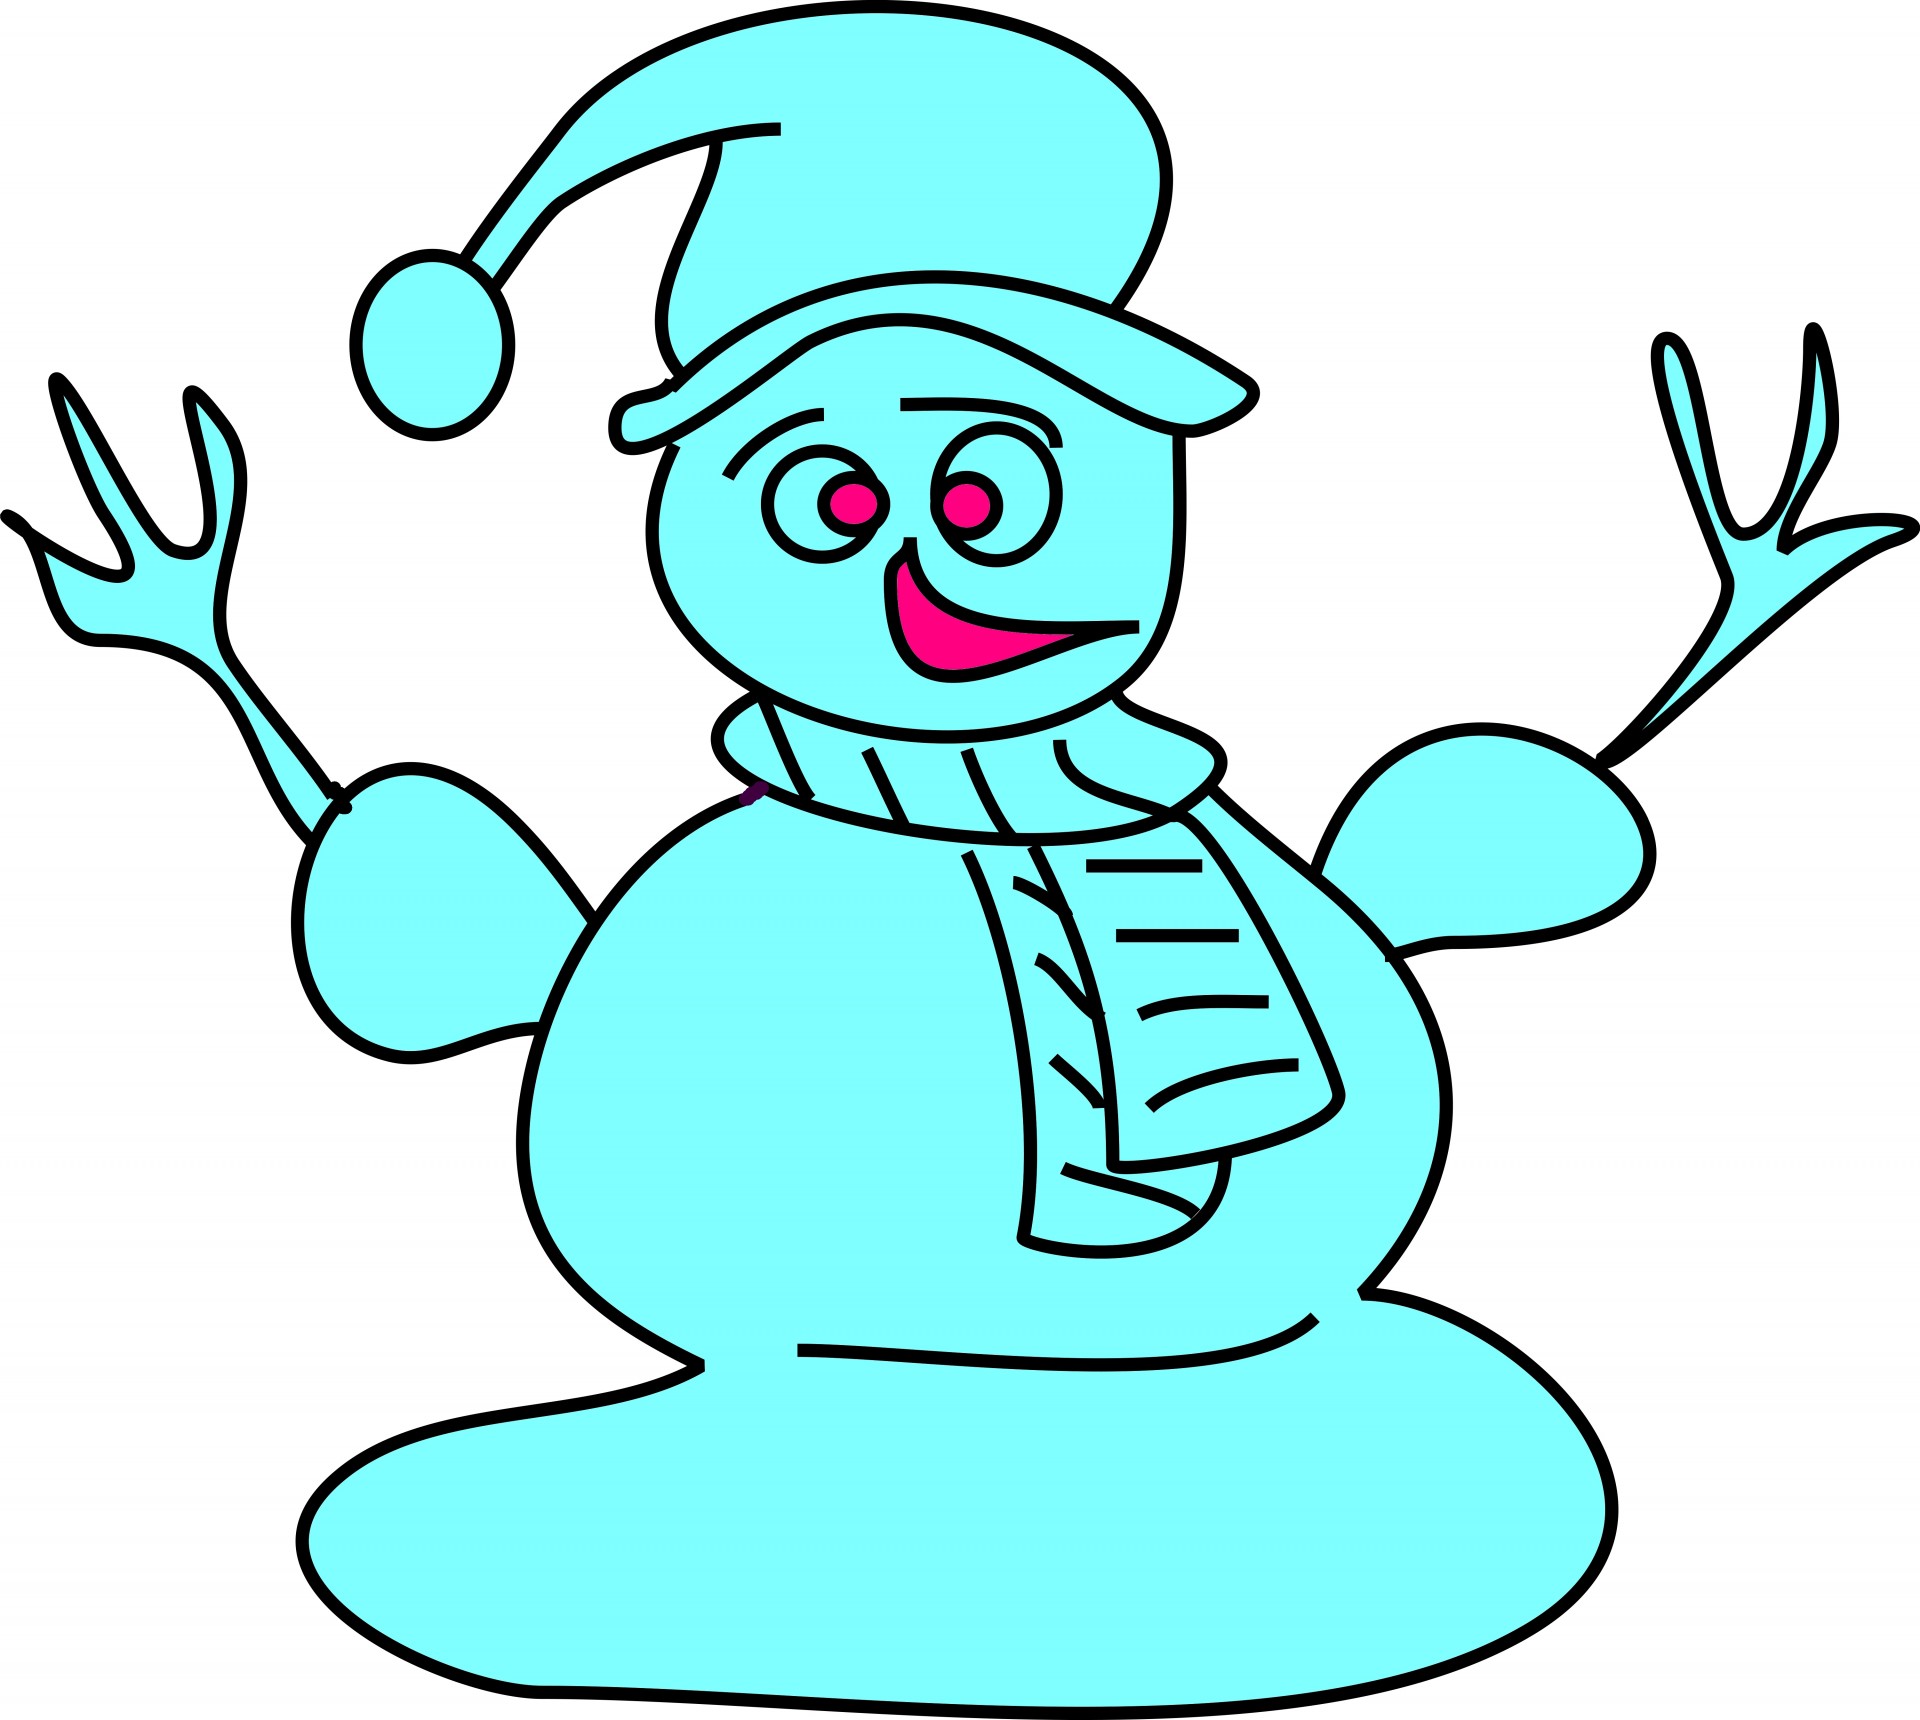 doodle drawing snowman free photo